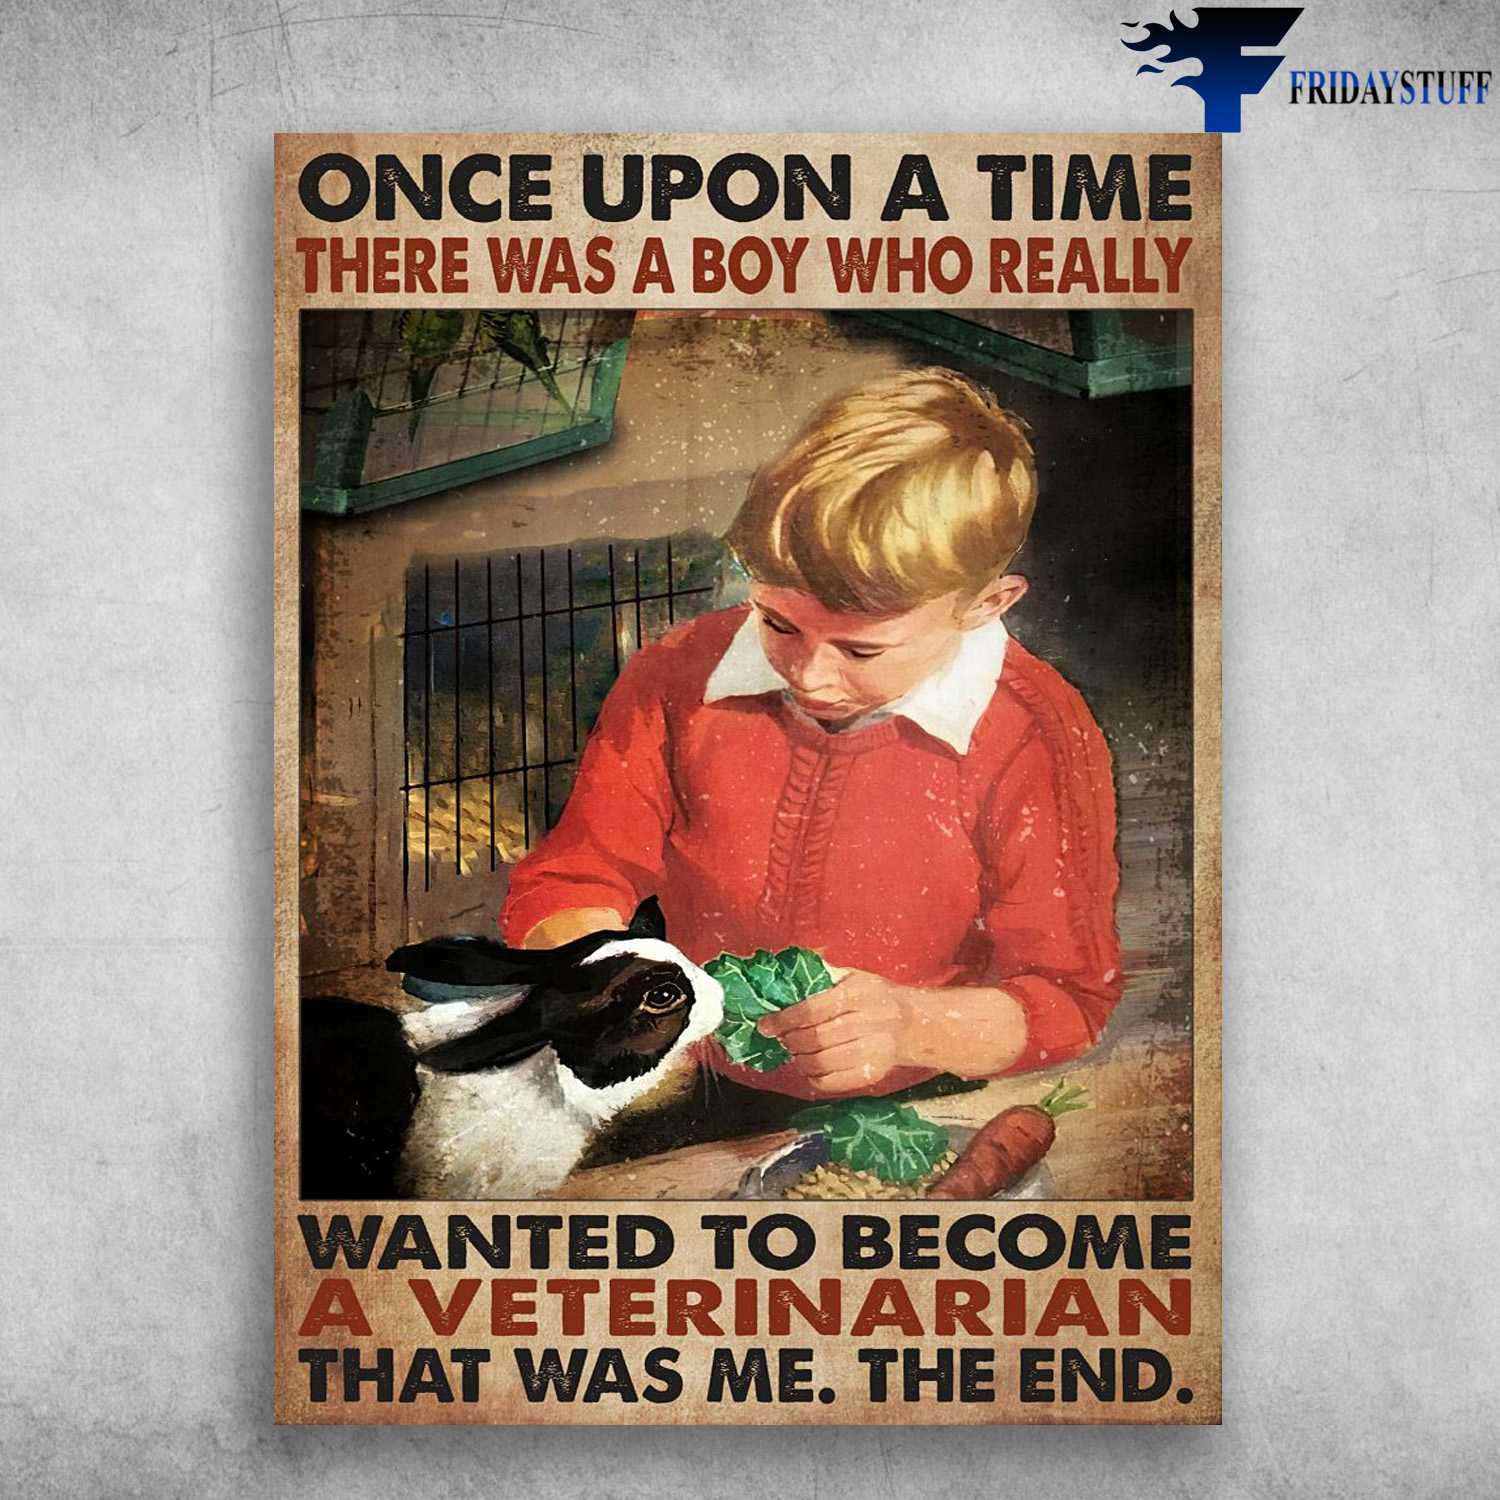 Boy And Rabbit, Veterinarian Poster - Once Upon A Time, There Was A Boy, Who Really Wanted To Become, A Vererinarian, That Was Me, The End